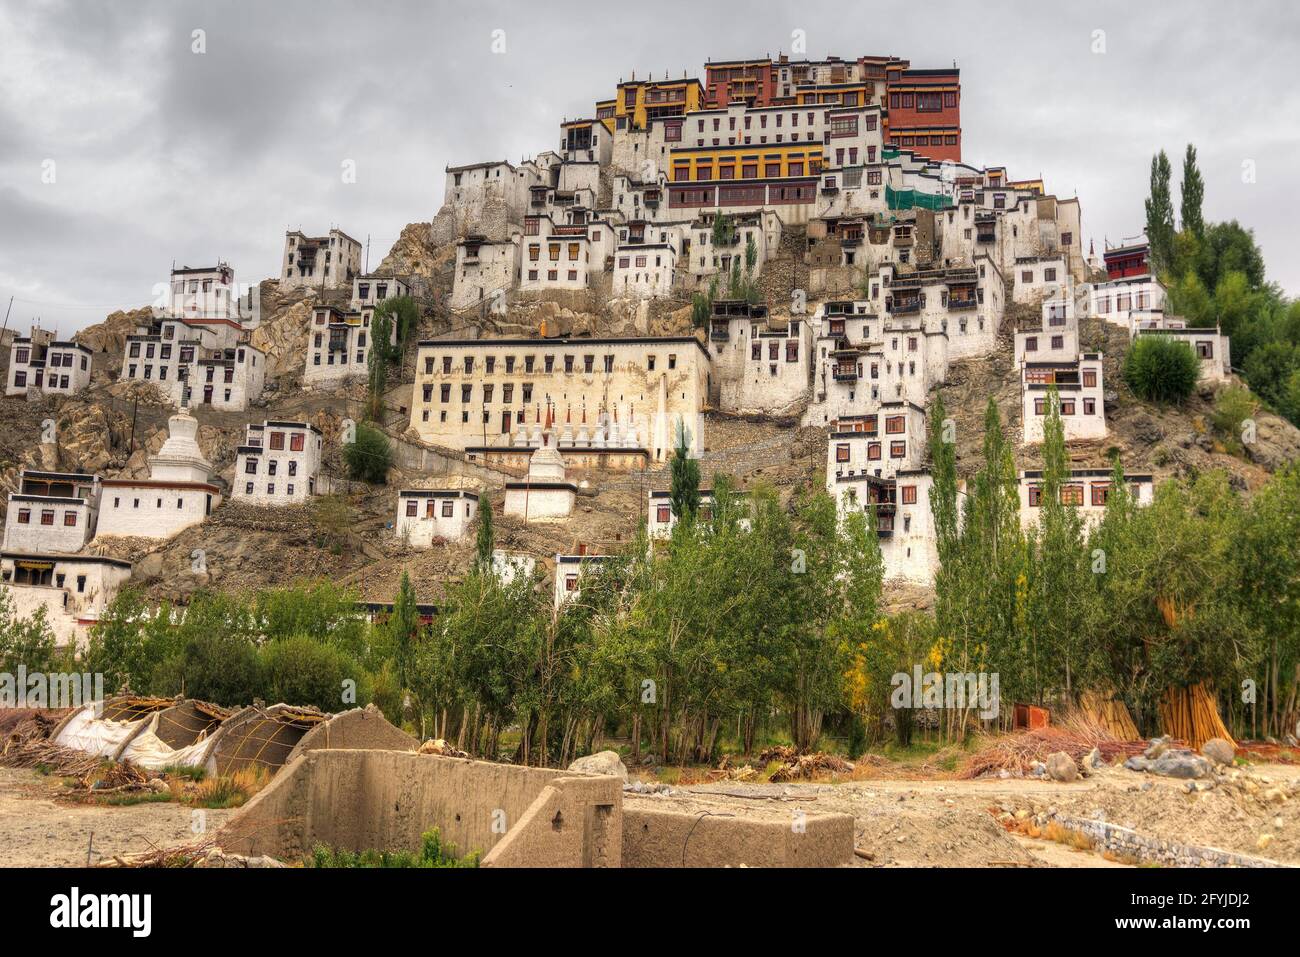 Thiksay monastery with view of Himalayan mountians - it is a famous Buddhist temple in,Leh, Ladakh, Jammu and Kashmir, India. Stock Photo